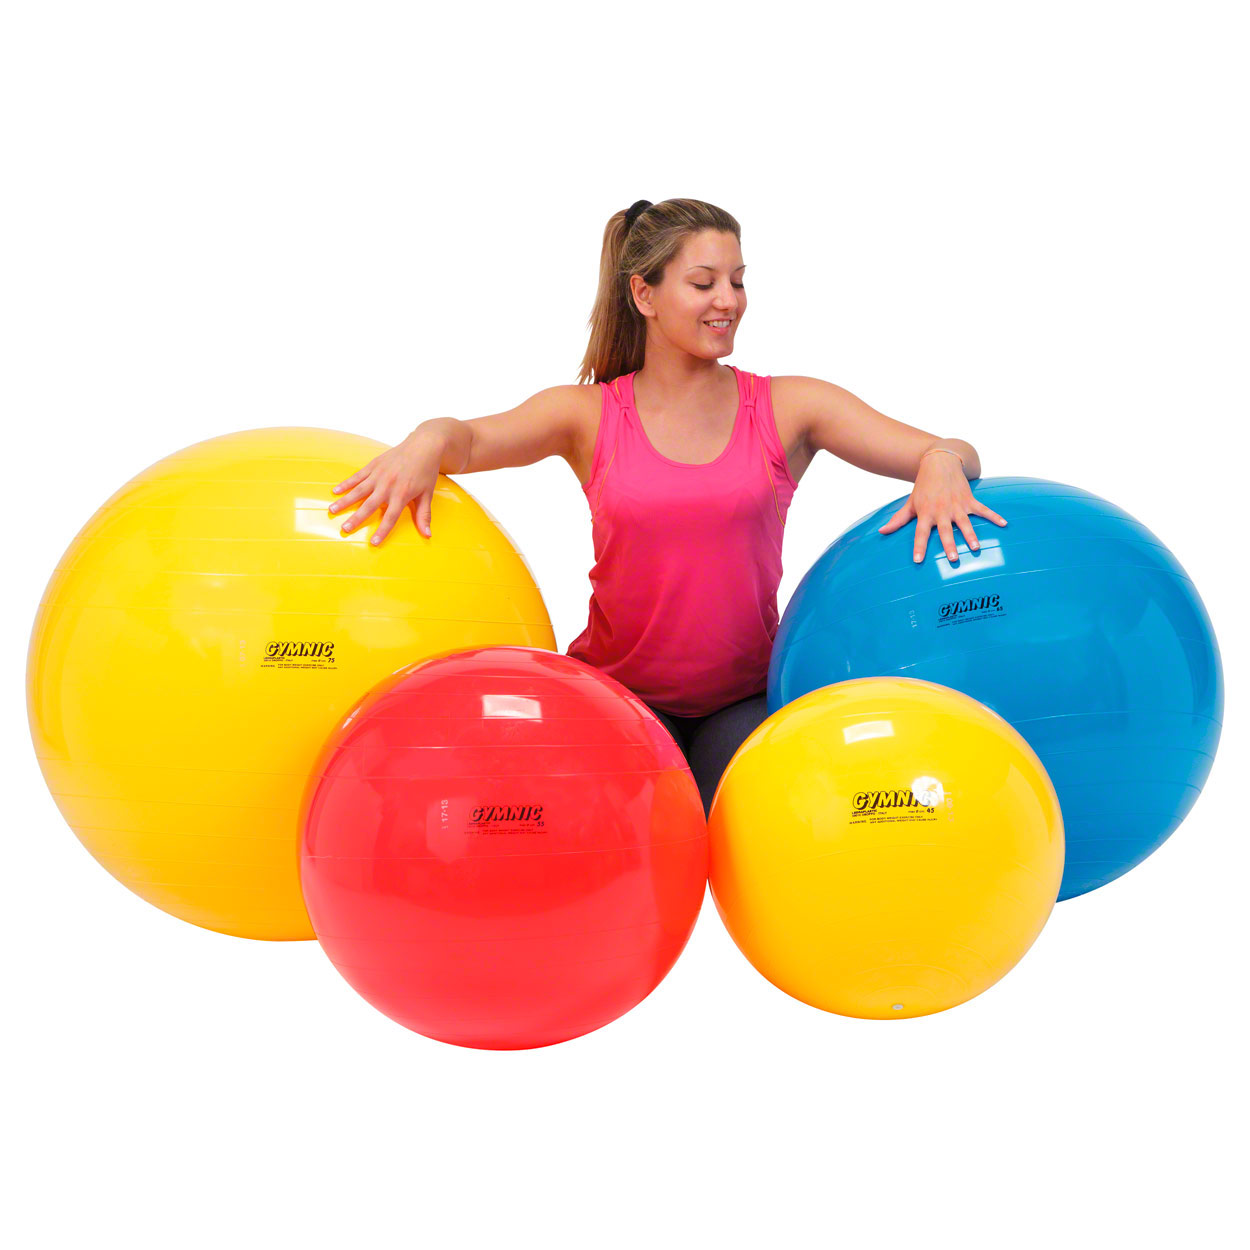 Maternity Gymnic Classic Plus Exercise Ball 75cm Yellow Fitness Physiotherapy